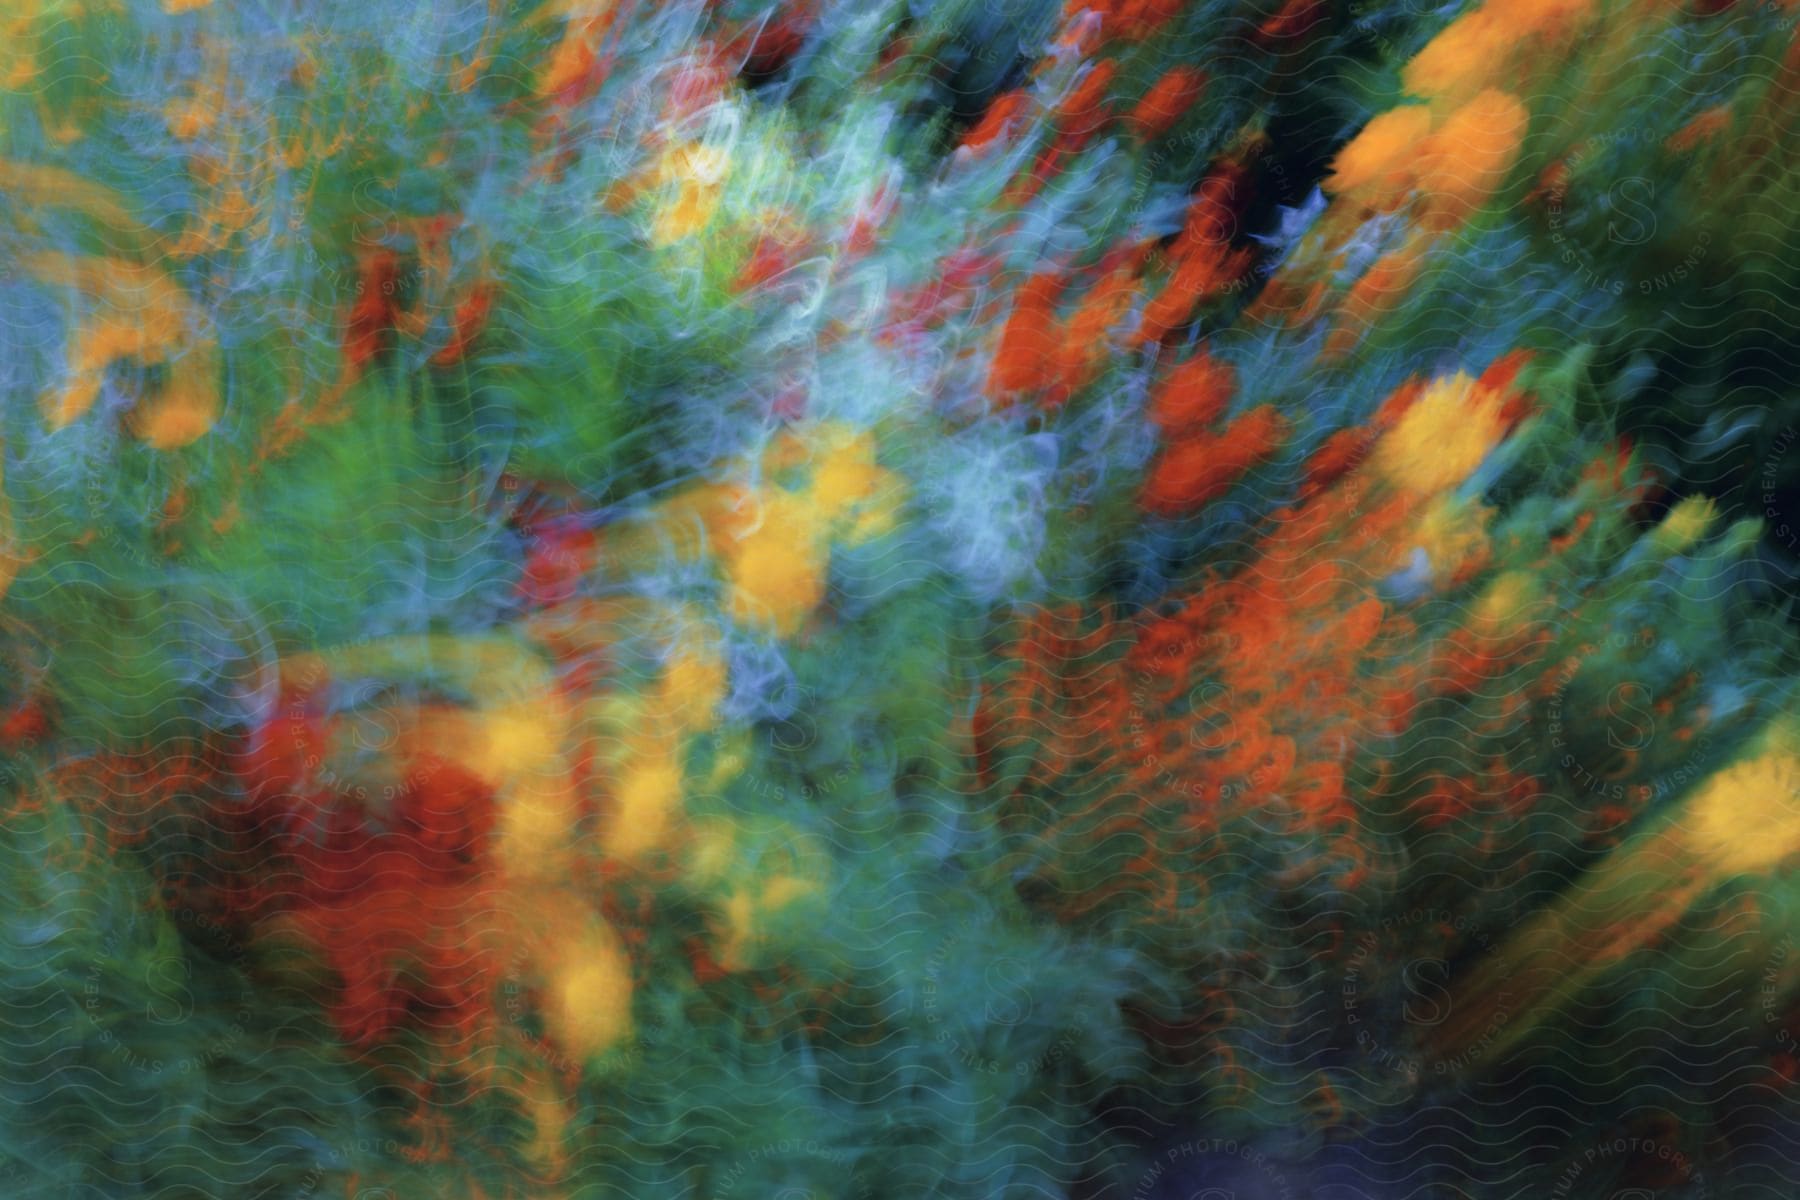 A blurred painting with splashes of color approximating flowers